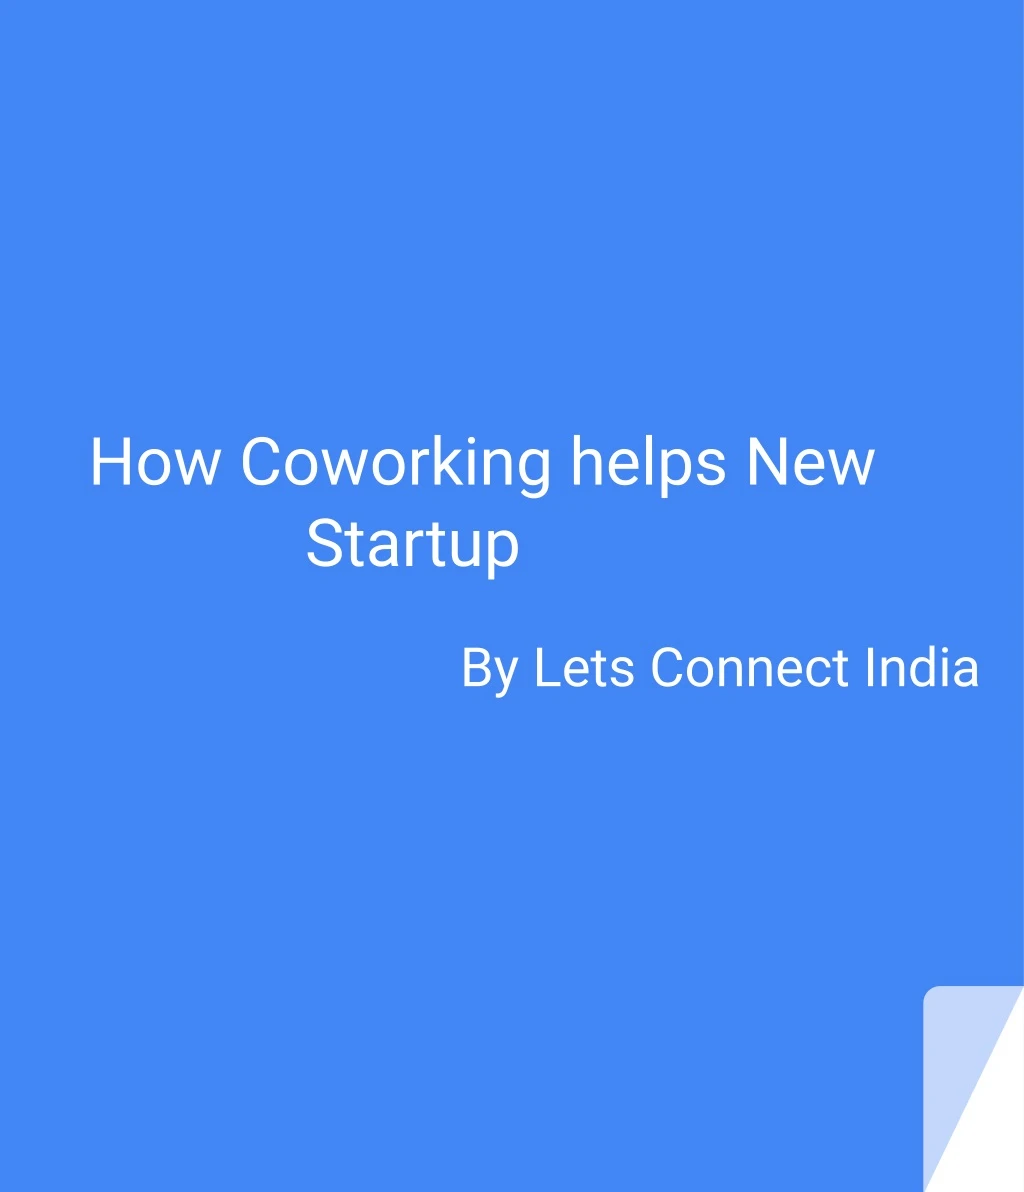 how coworking helps new startup